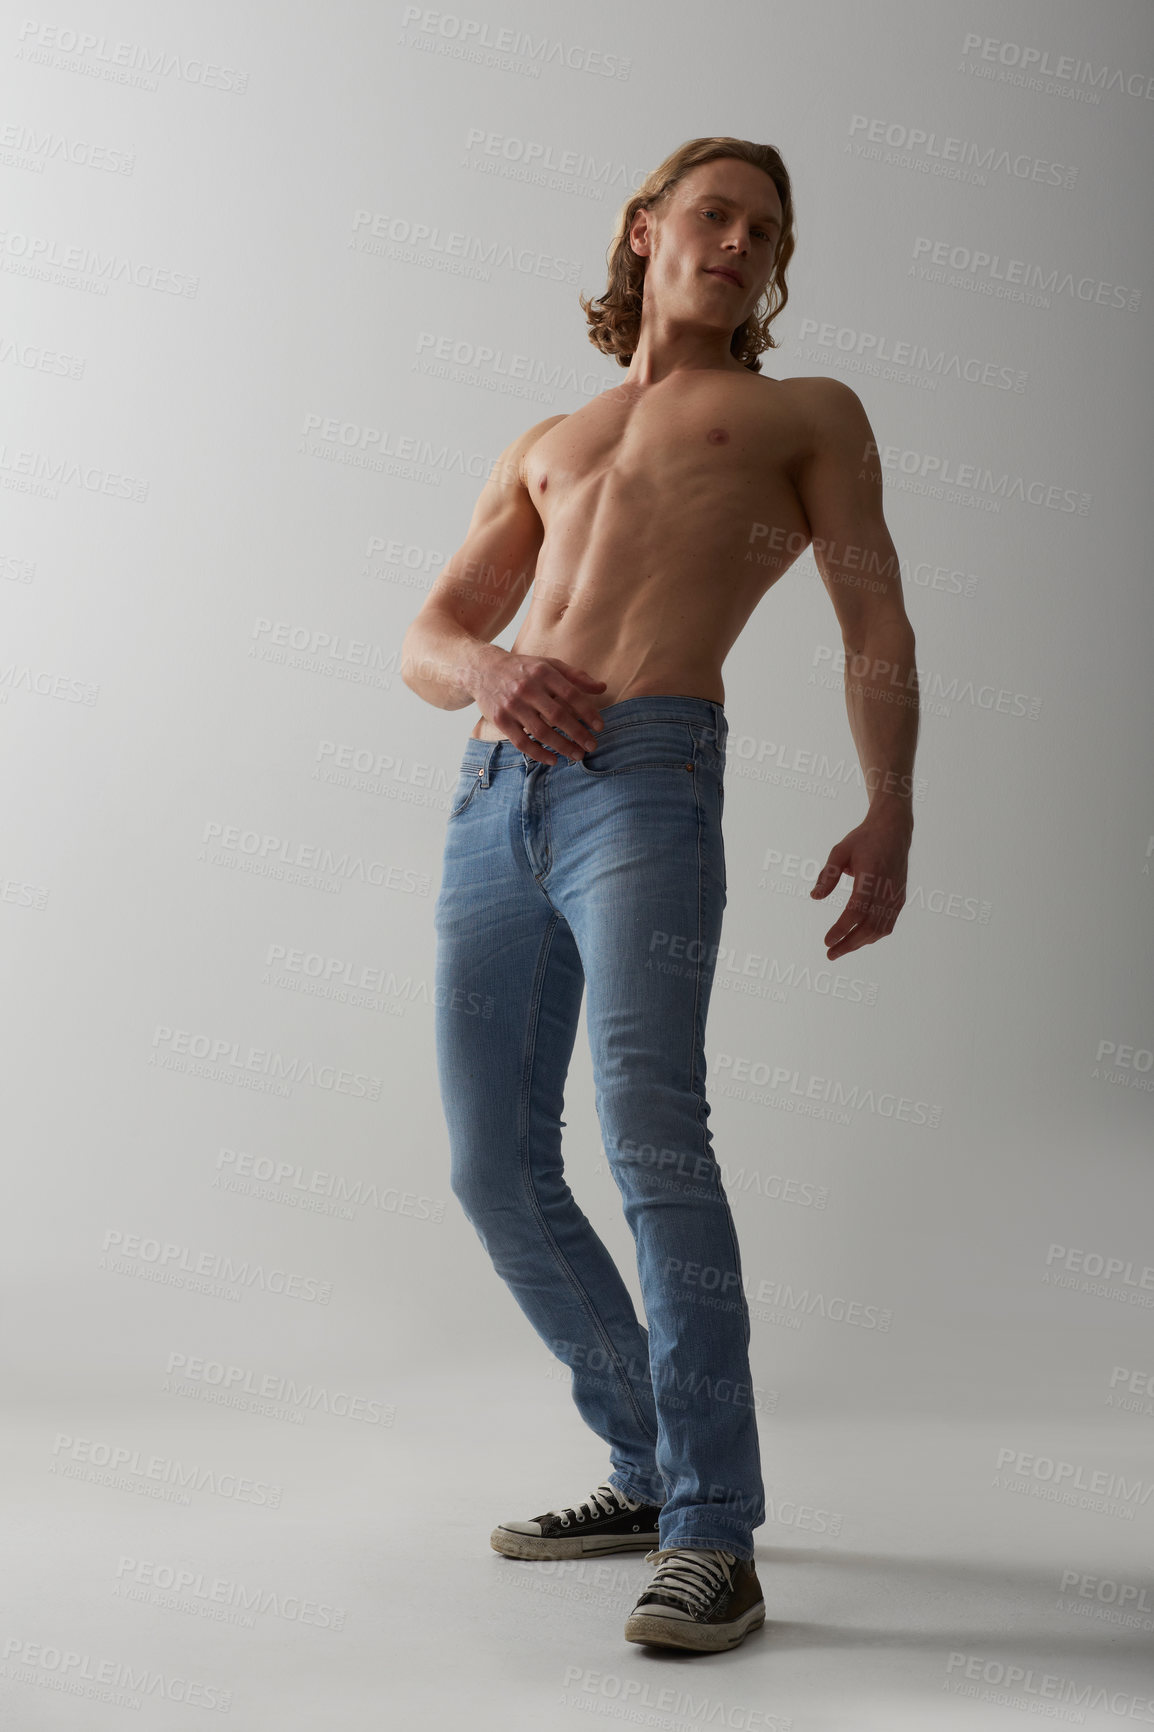 Buy stock photo Studio shot of a young man with a bare chest